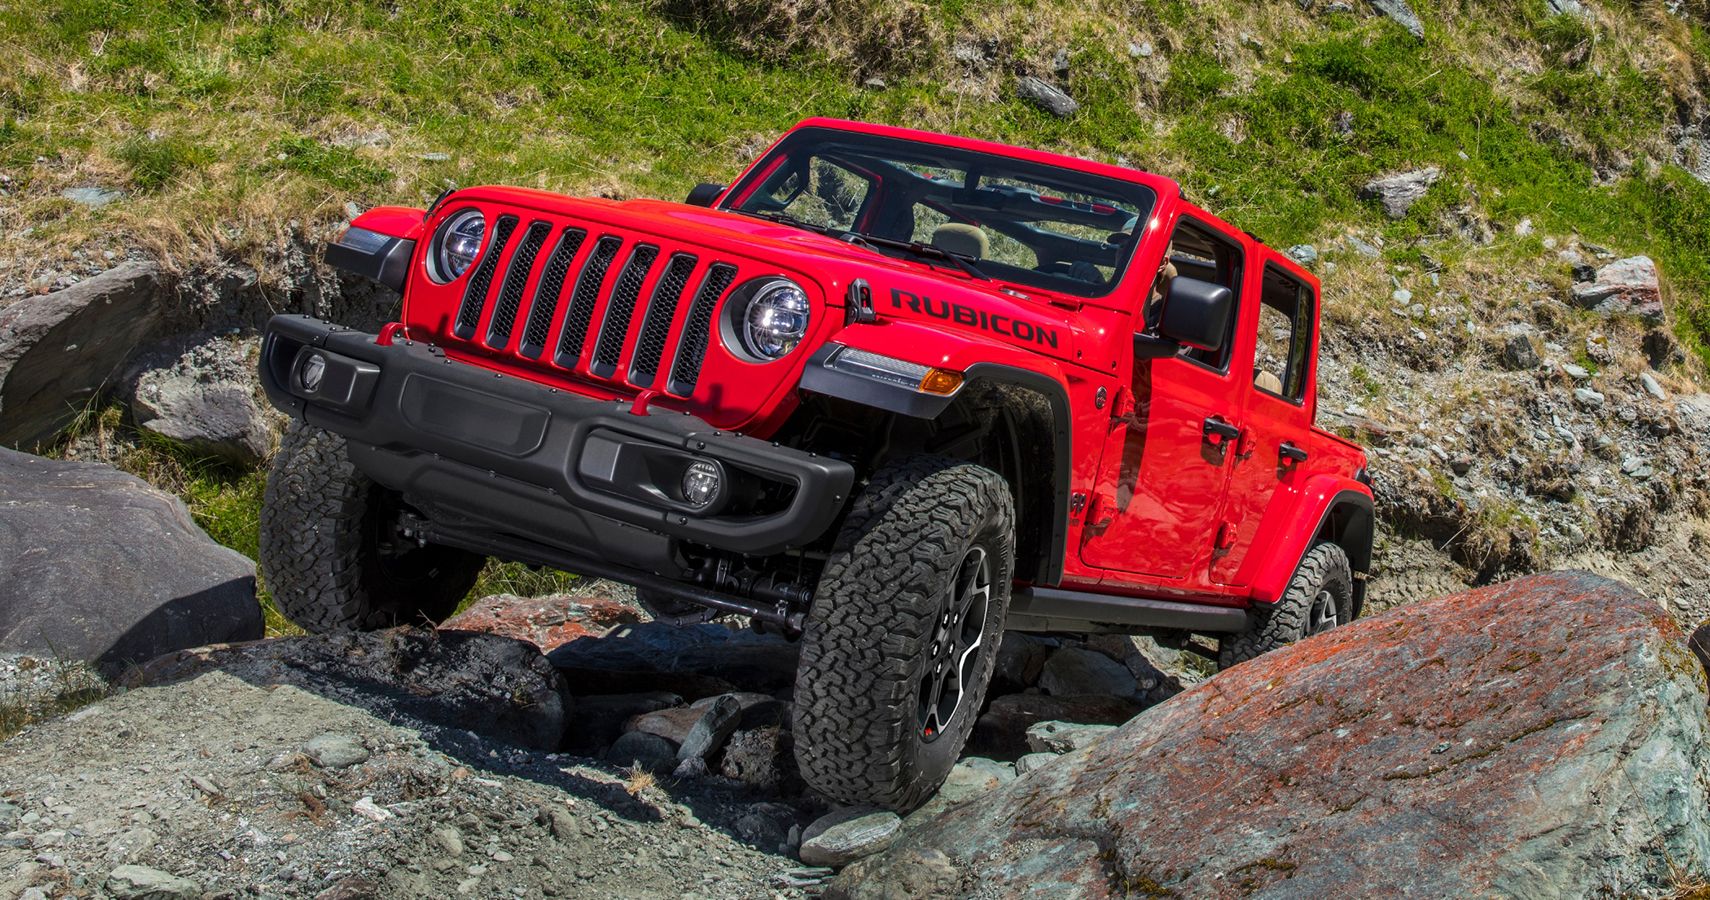 The updated Jeep Wrangler has brilliant new colour options